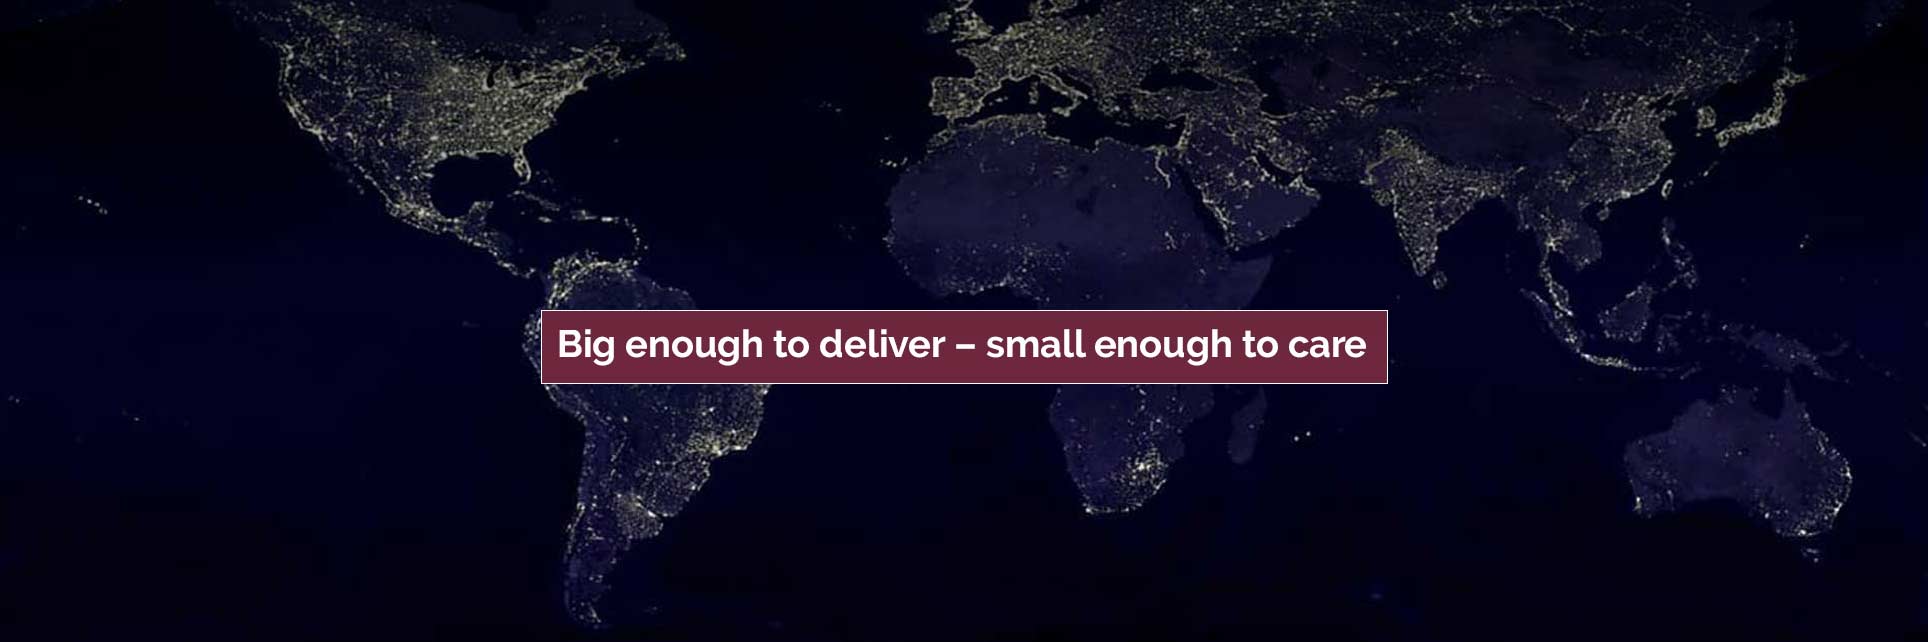 Big enough to deliver – small enough to care